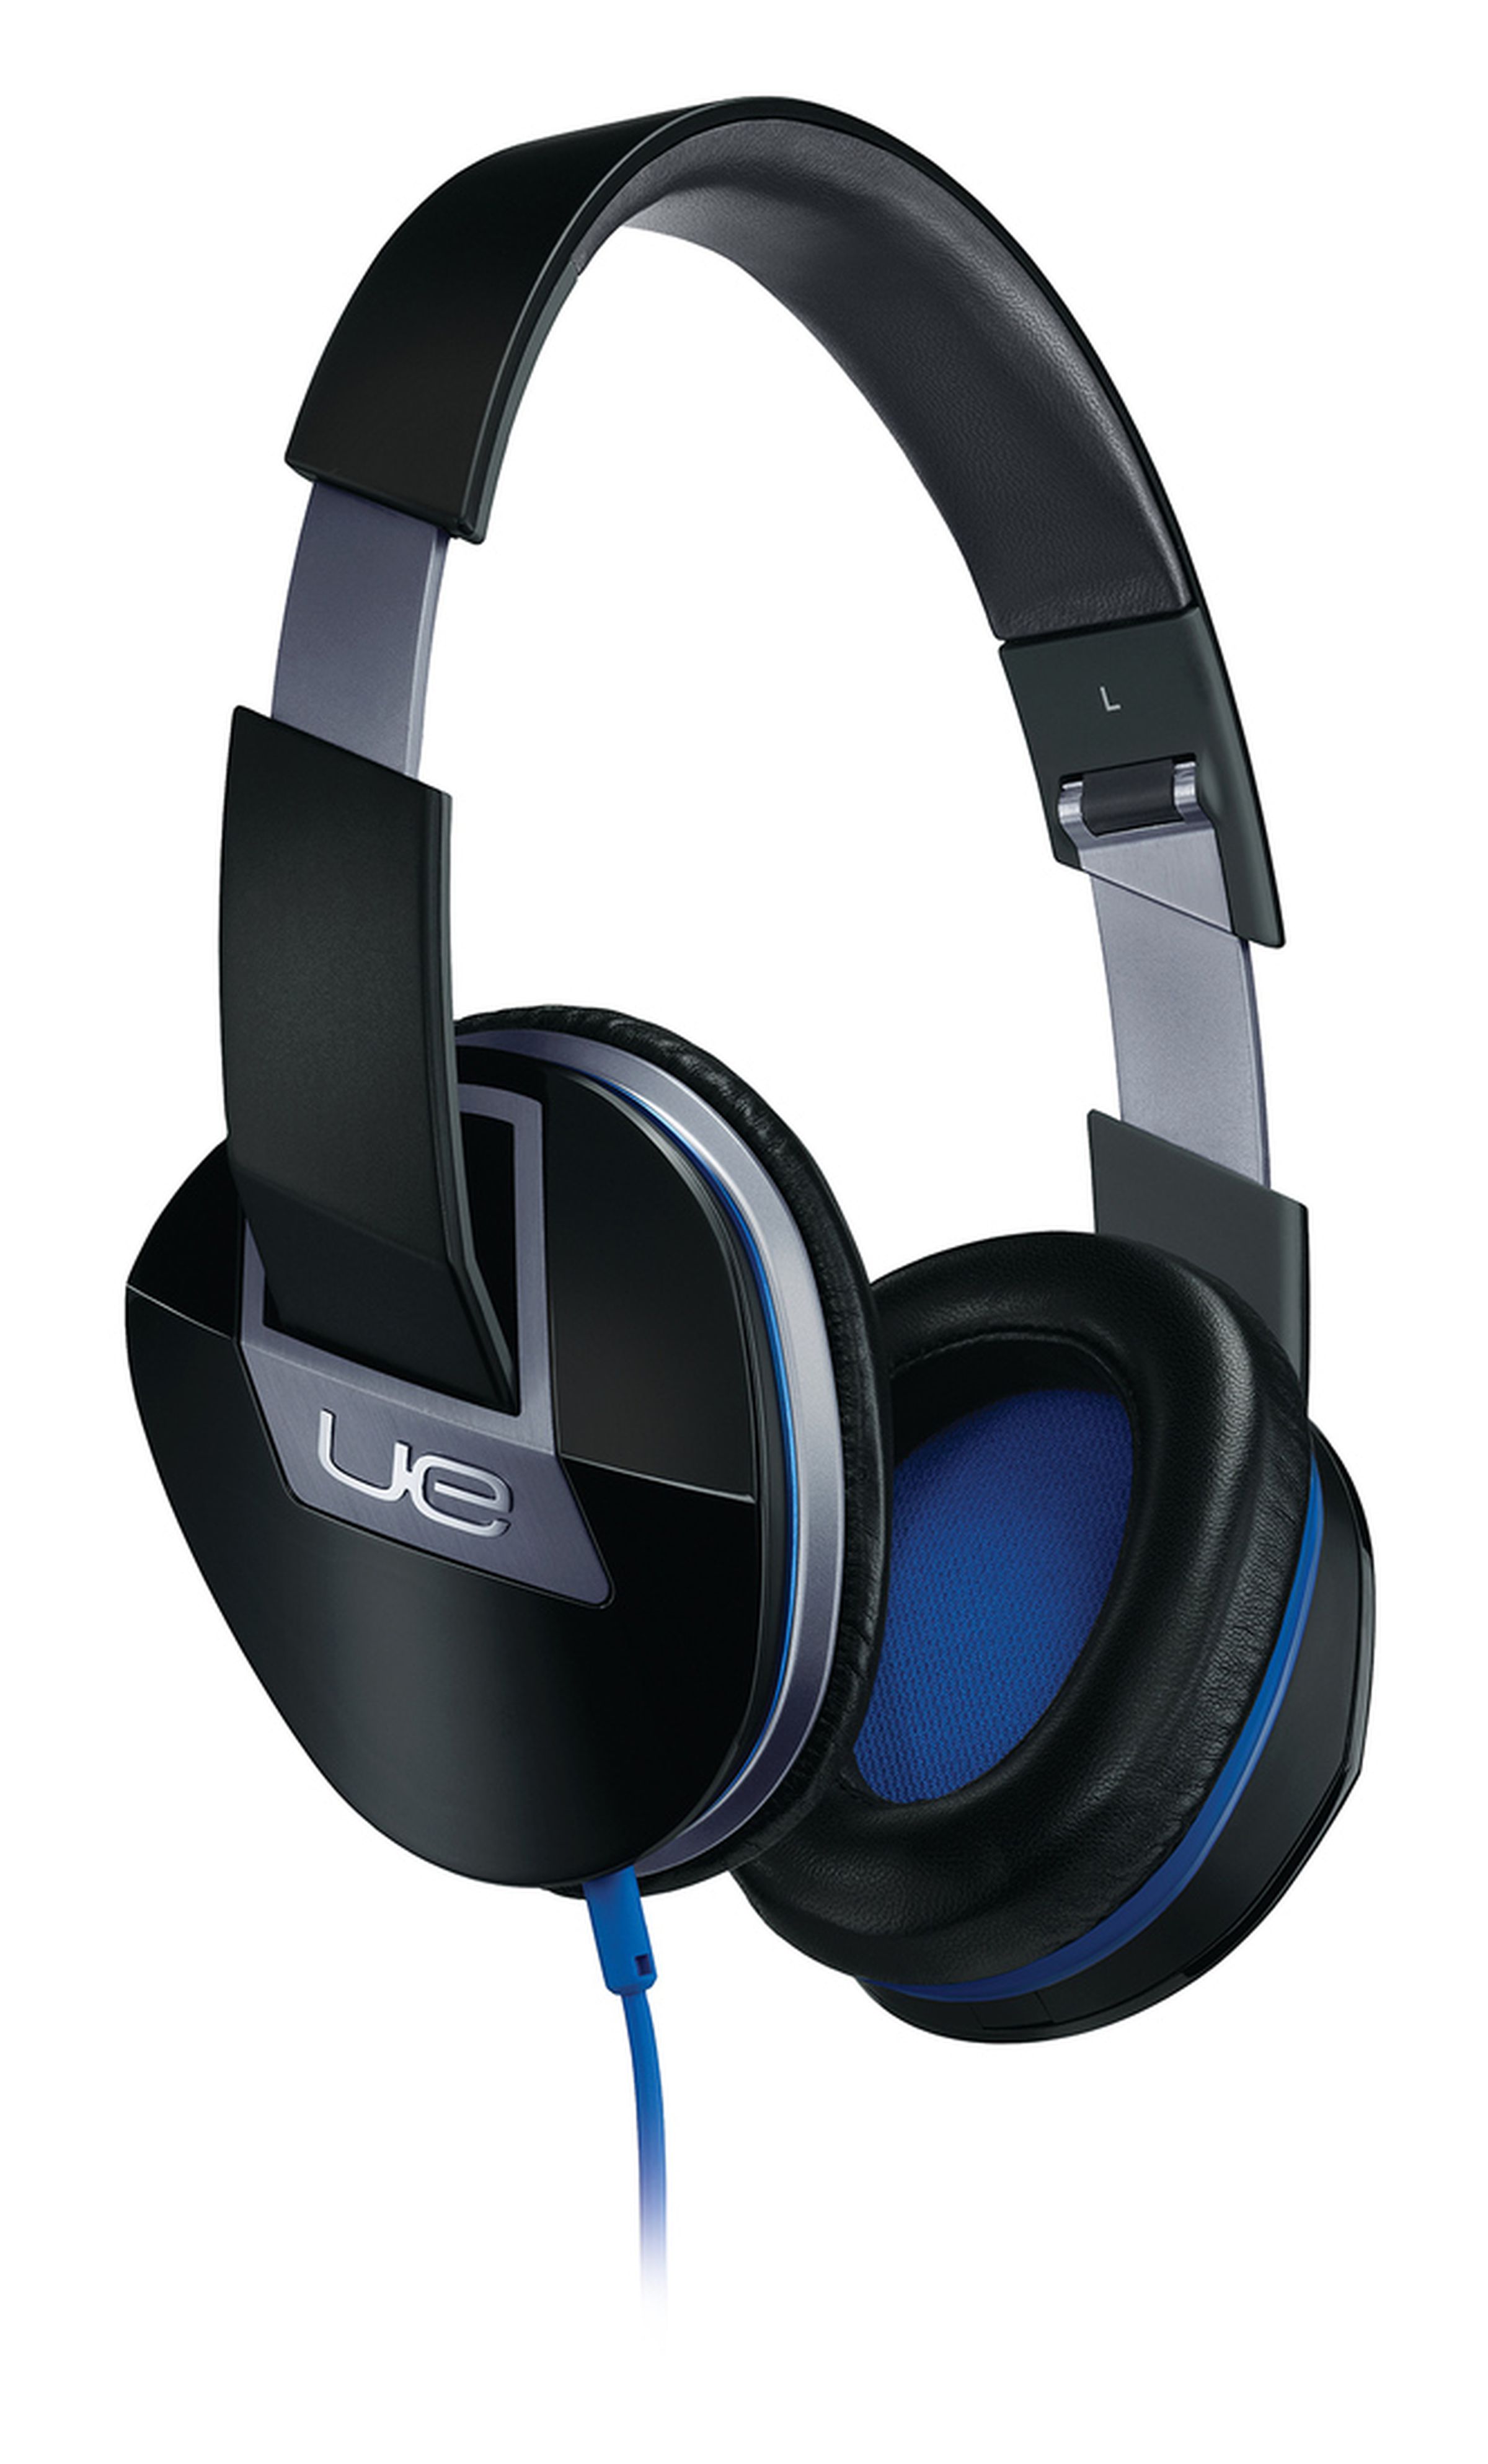 Logitech UE headphones, Boombox, and Mobile Boombox press images